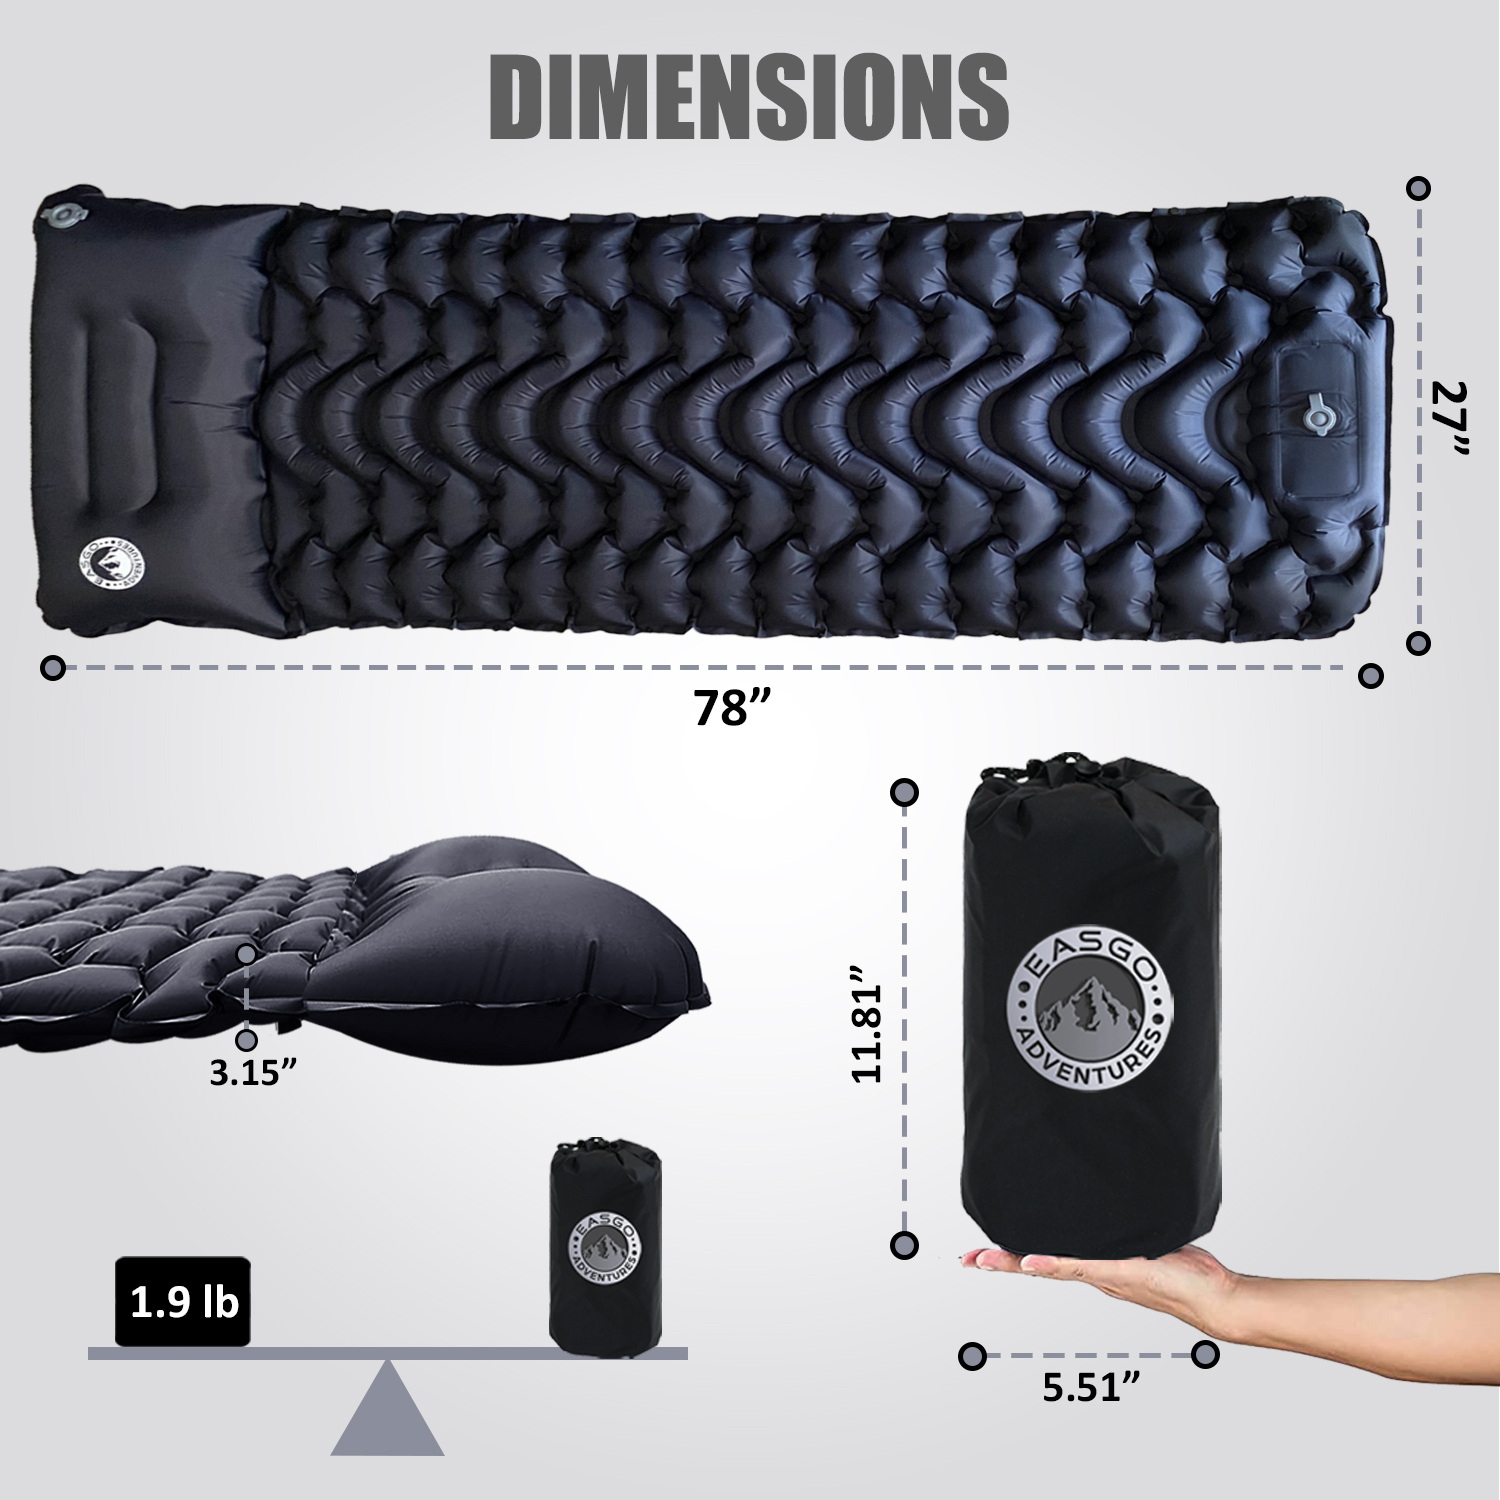 Ultralight Inflatable Sleeping Pad for Camping, Backpacking, Hiking, Travel, Built-In Step Inflating Air Pump, Integrated Pillow, Indoor Outdoor Firm Sleep Support, Compact and Portable, Black - image 3 of 6